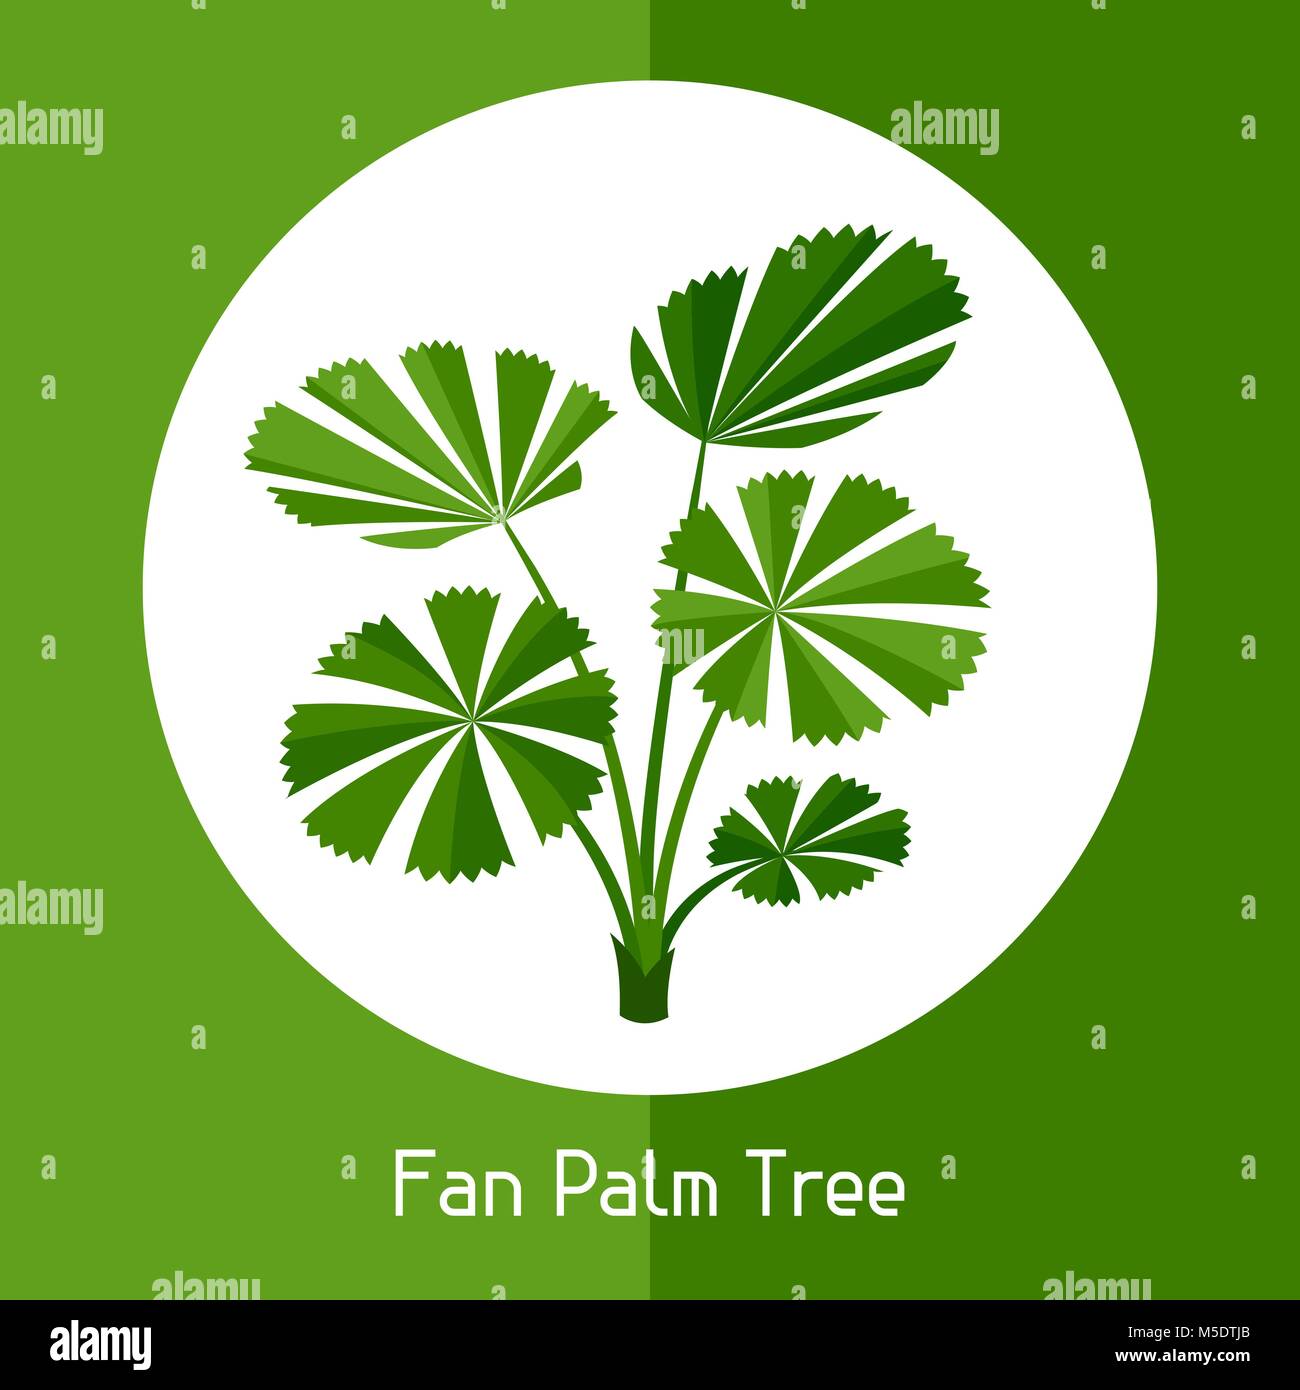 Fan palm tree. Illustration of exotic tropical plant Stock Vector